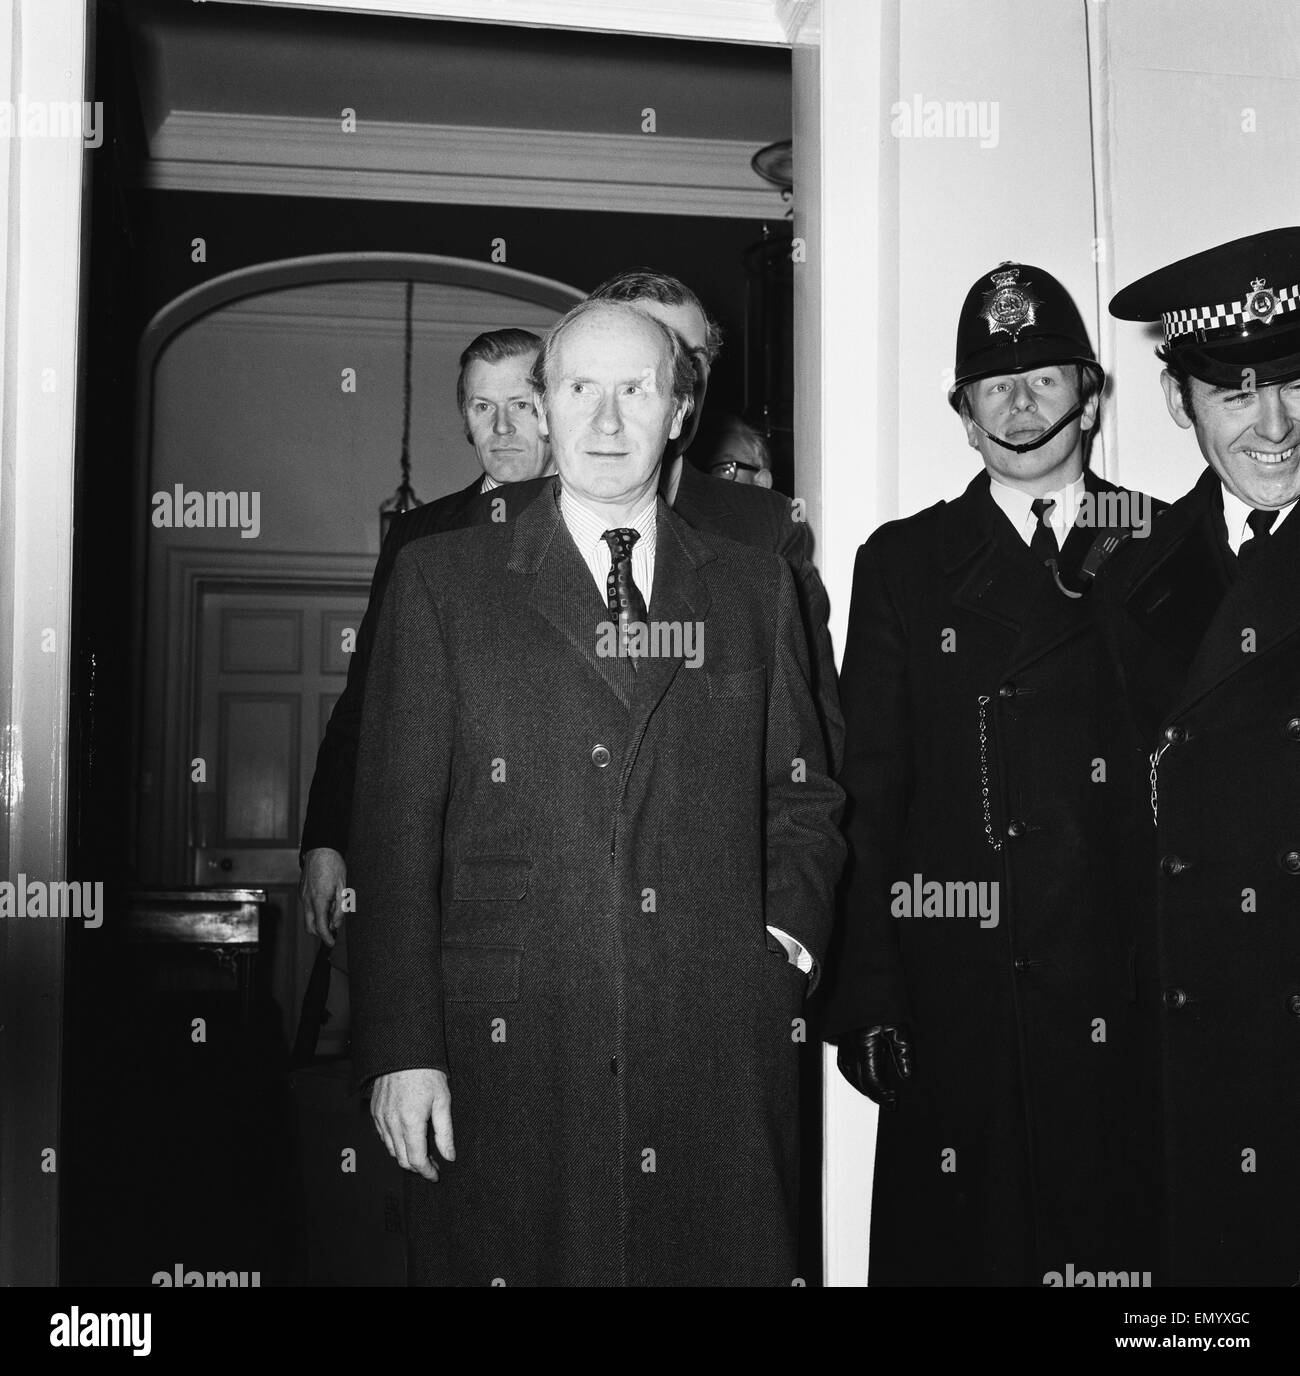 Chancellor of the Exchequer Anthony Barber dejectedly leaves number 11 Downing Street on his way to the House of Commons to deliver a 'mini budget' during the Oil Crisis. 17th December 1973. Stock Photo